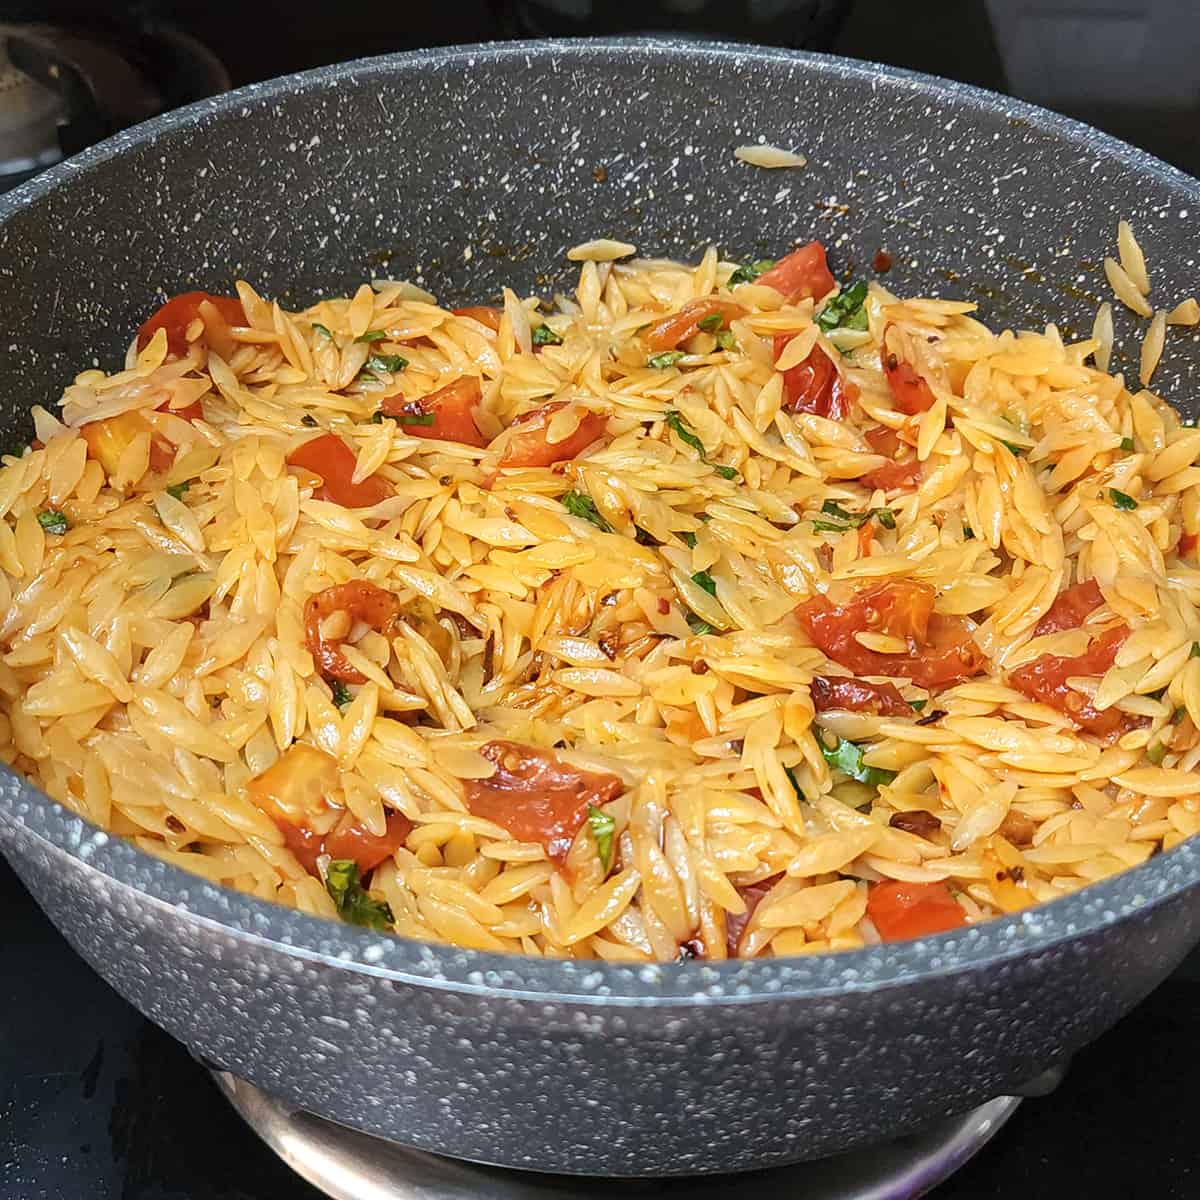 Warm orzo pasta with tomatoes and basil in pan.